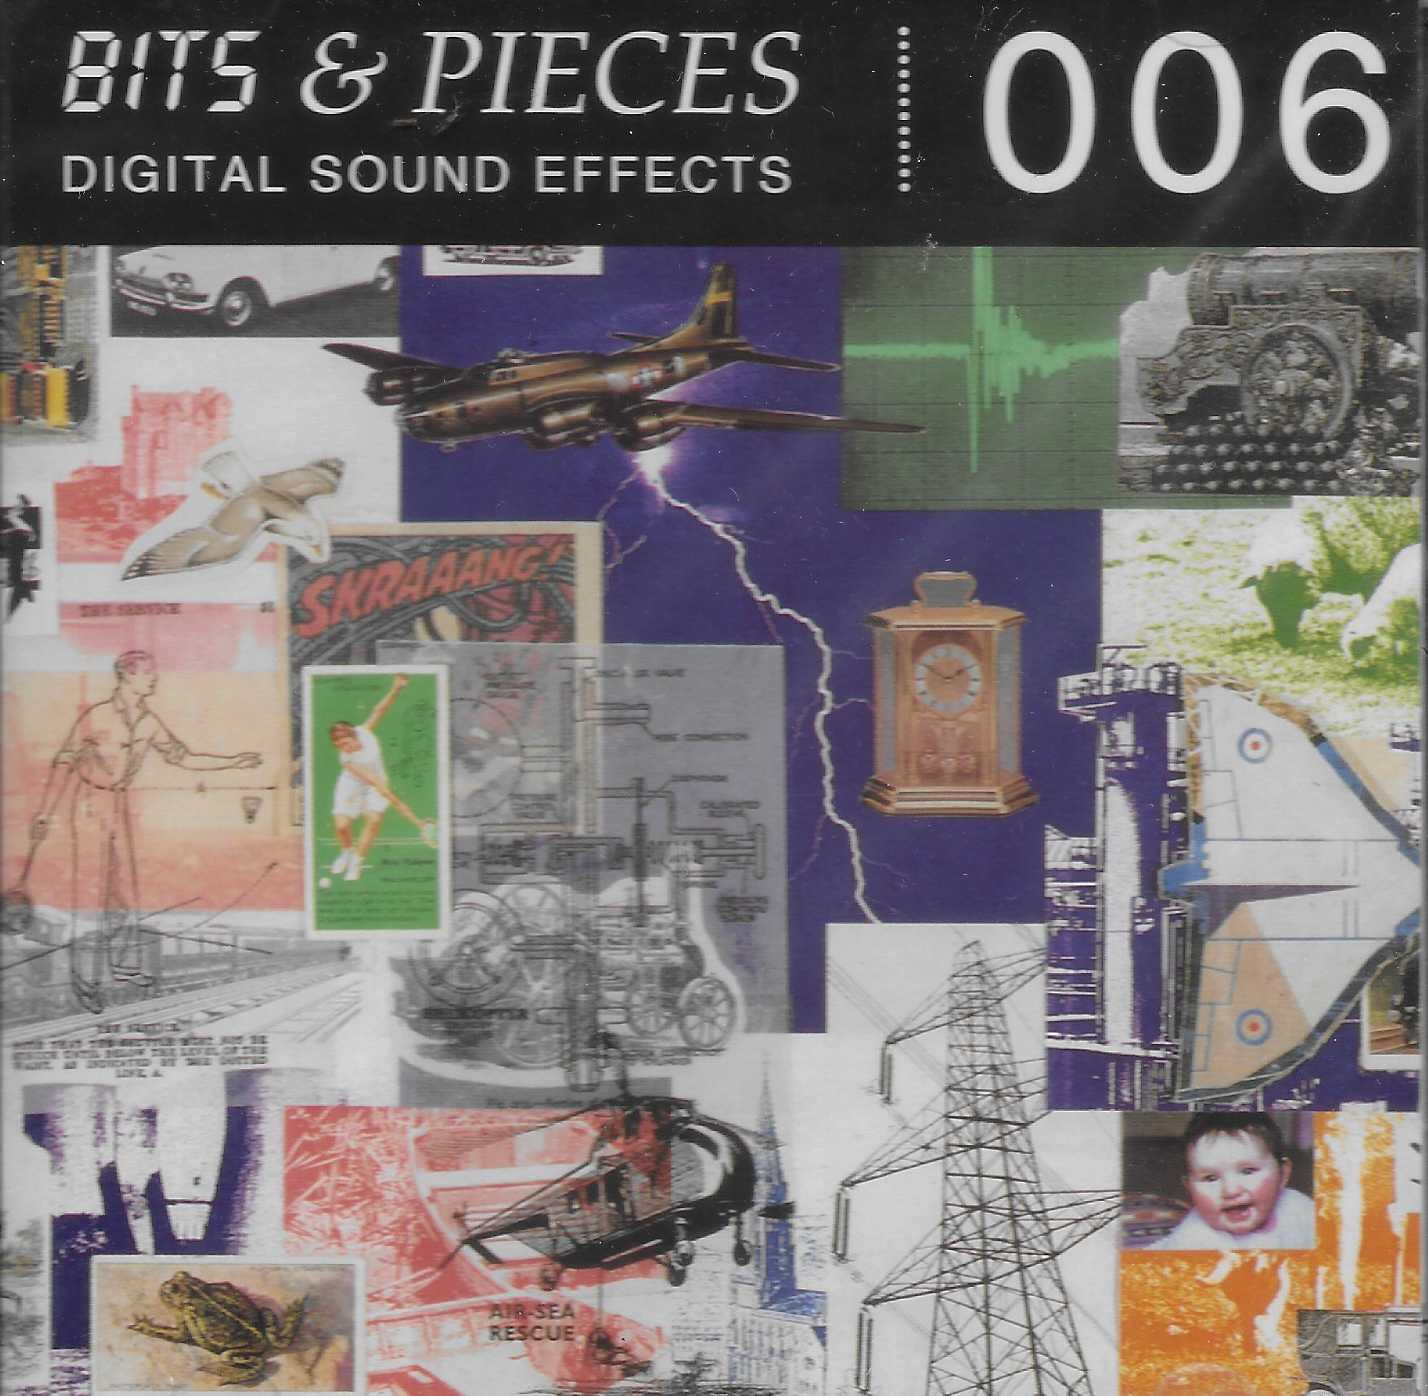 Picture of Bits & pieces digital sound effects 006 by artist Various from ITV, Channel 4 and Channel 5 cds library